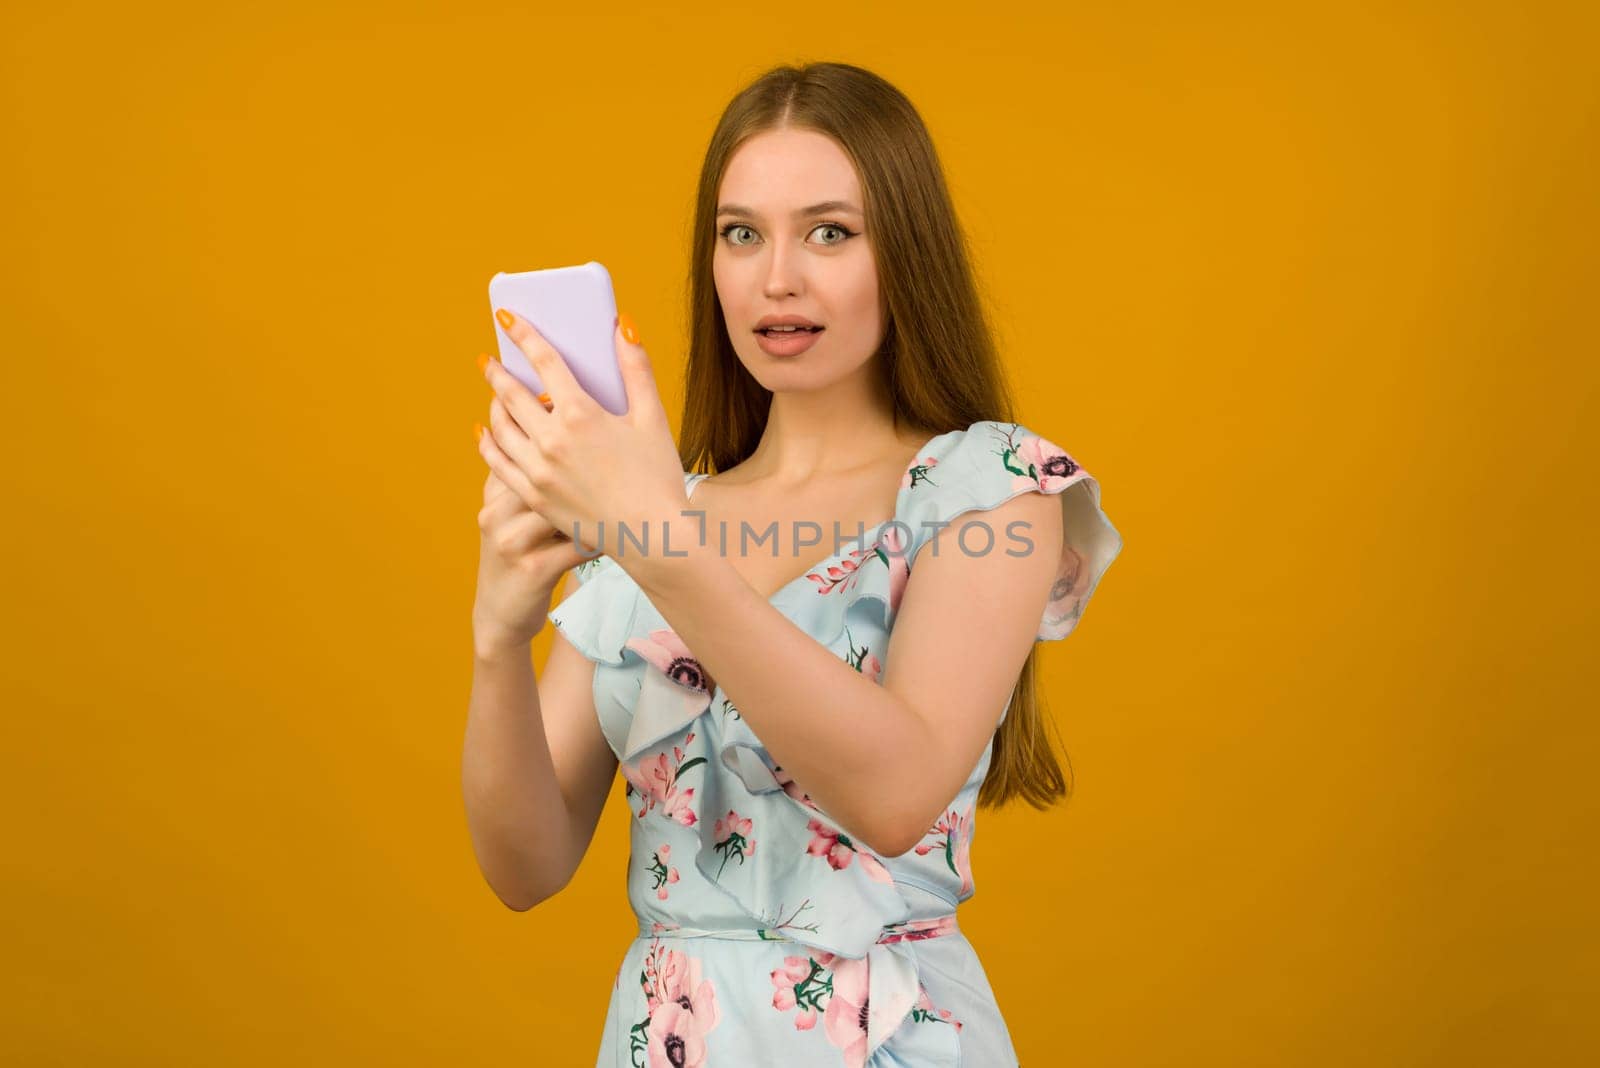 Young woman wears in sunner dress with flowers surprised by the news on a smartphone - image